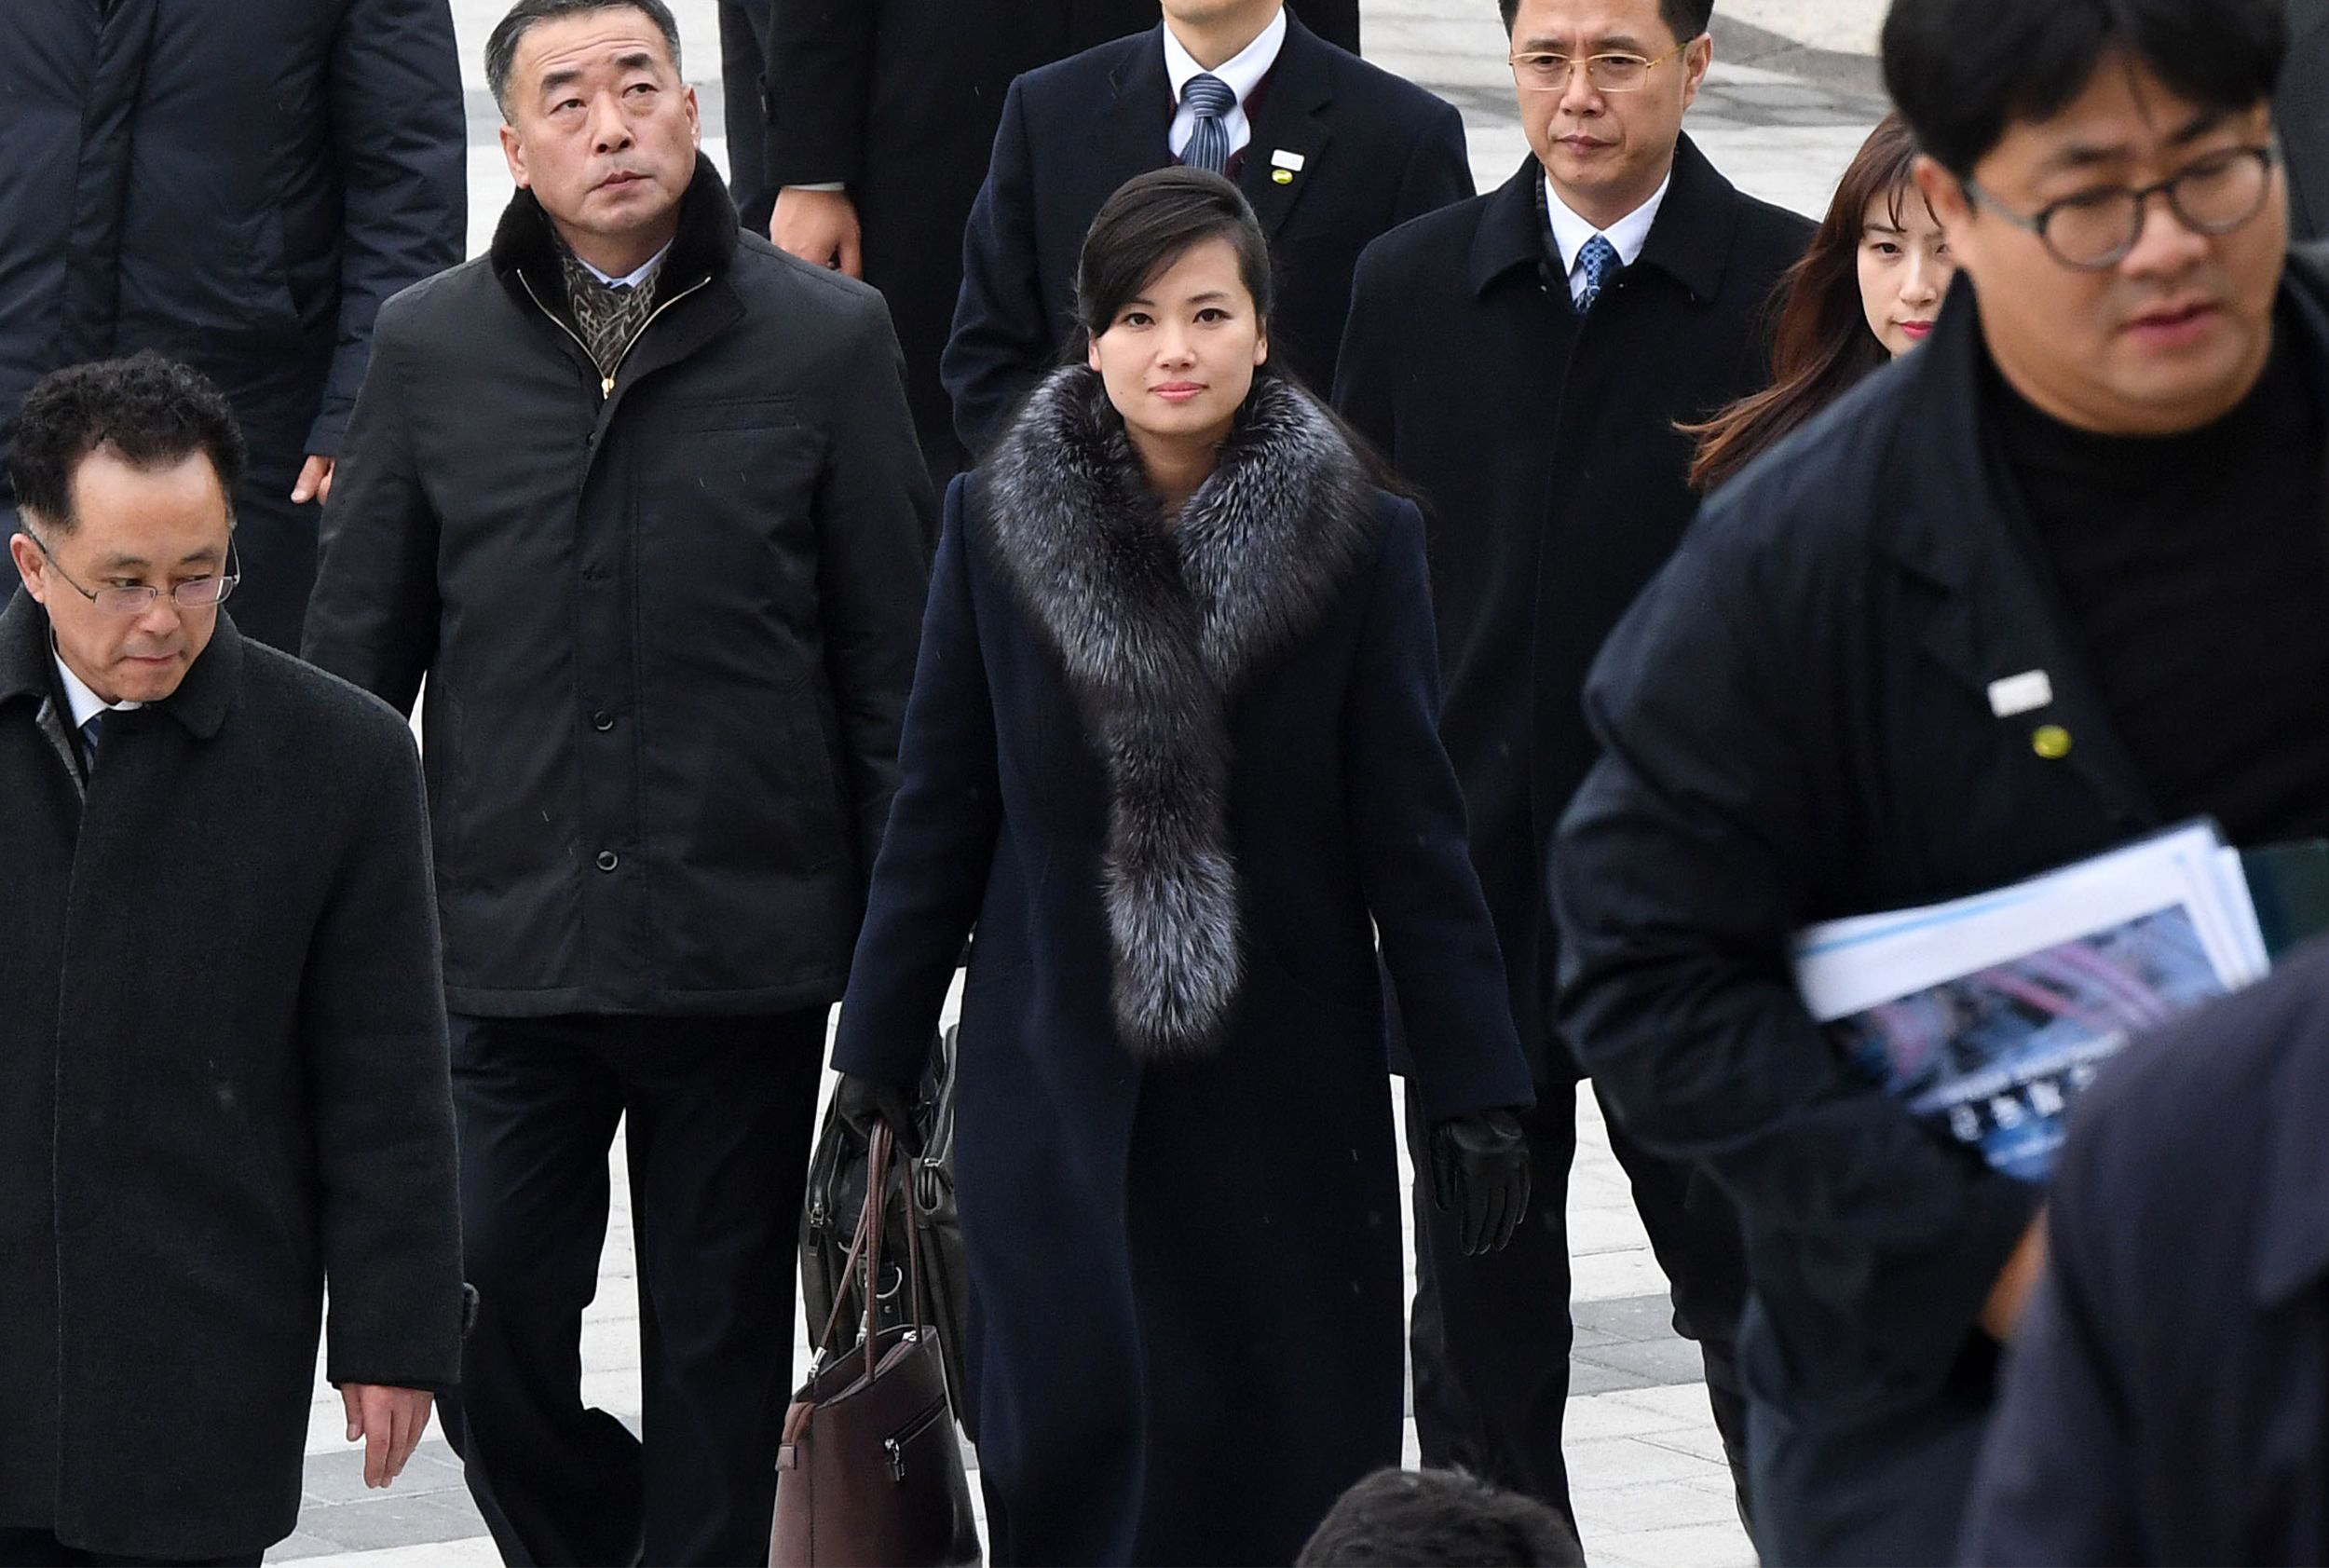 PHOTO: Hyon Song-Wol, center, leader of North Korea's popular Moranbong band, arrives at the Korea National Theater to inspect venues for planned musical concerts during the Winter Olympics in Seoul, Jan. 22, 2018.